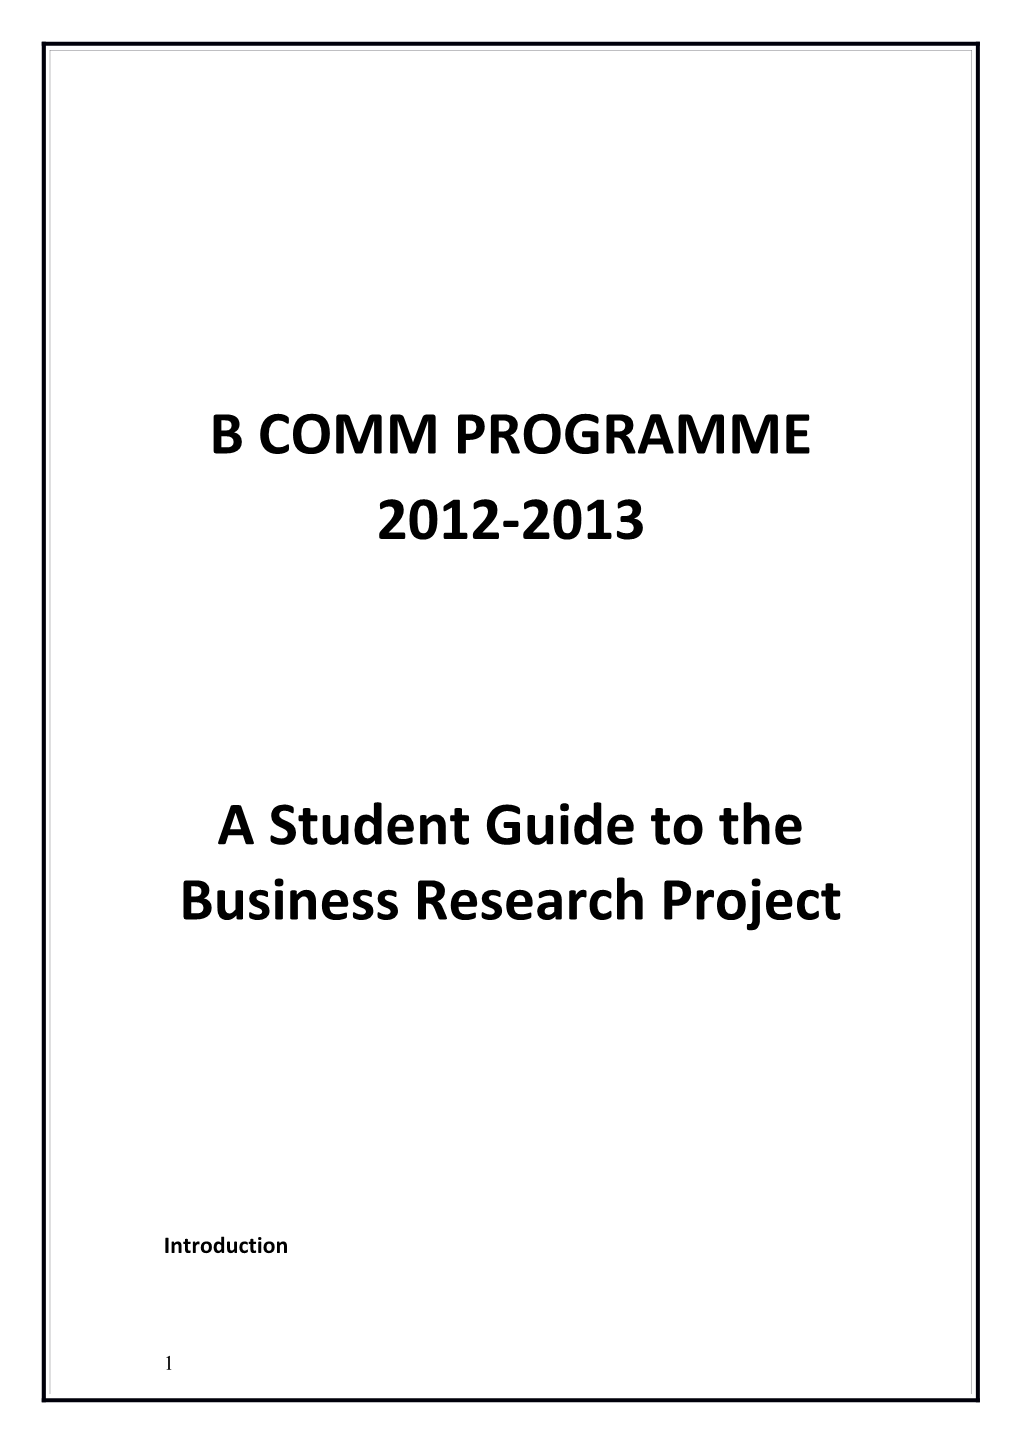 Assessment of Work Placement in Bcomm Degree